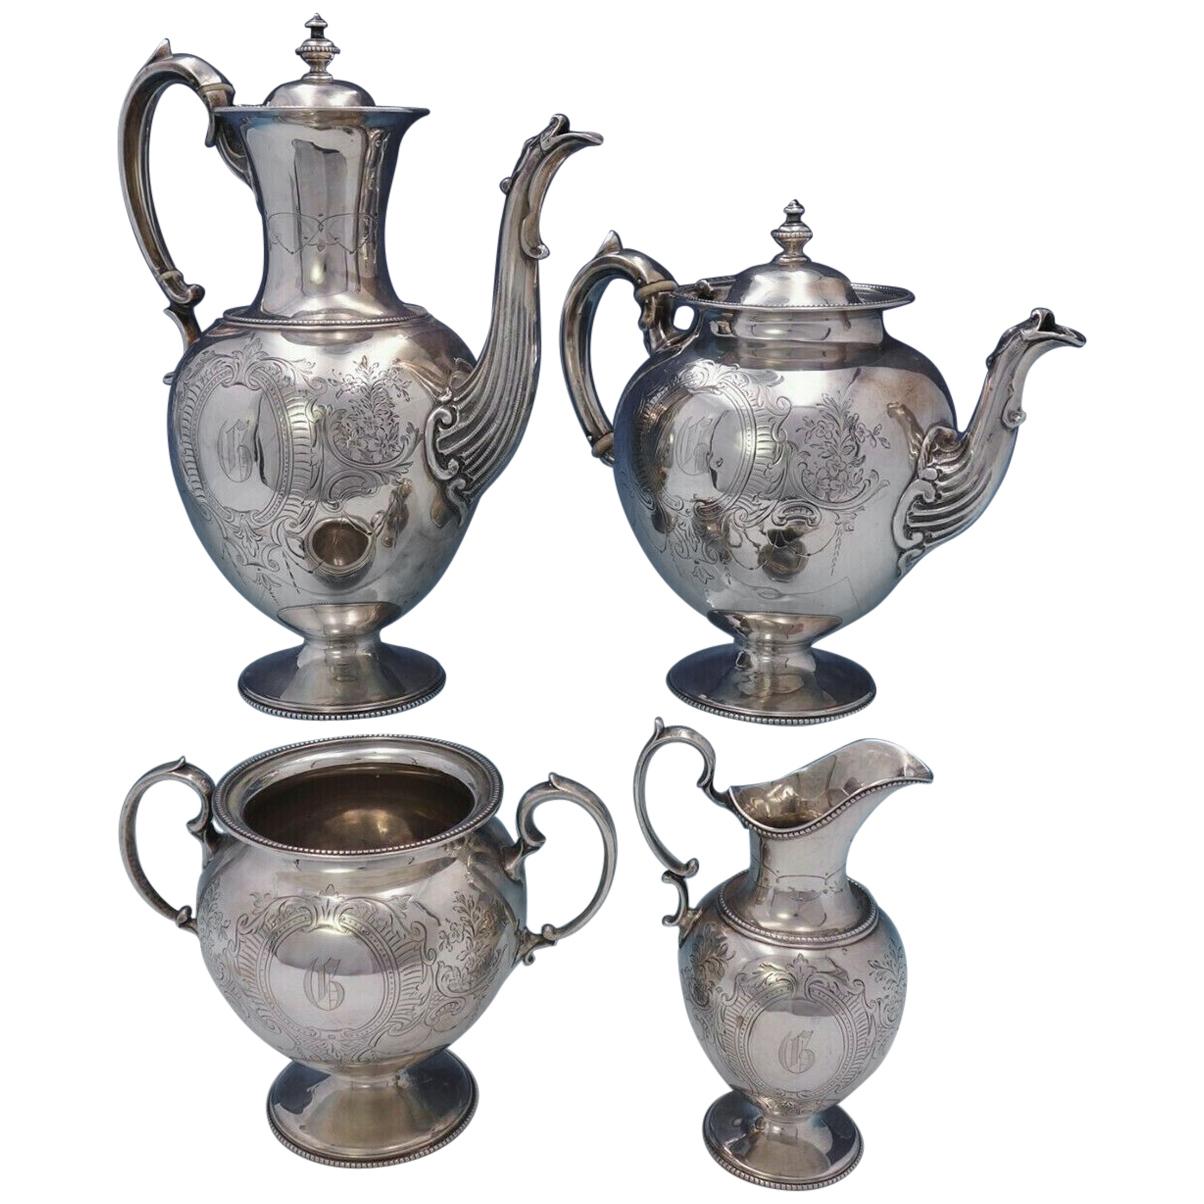 Martin Hall and Co. Sterling Silver Tea Set 4-Piece Hand Engraved, circa 1823